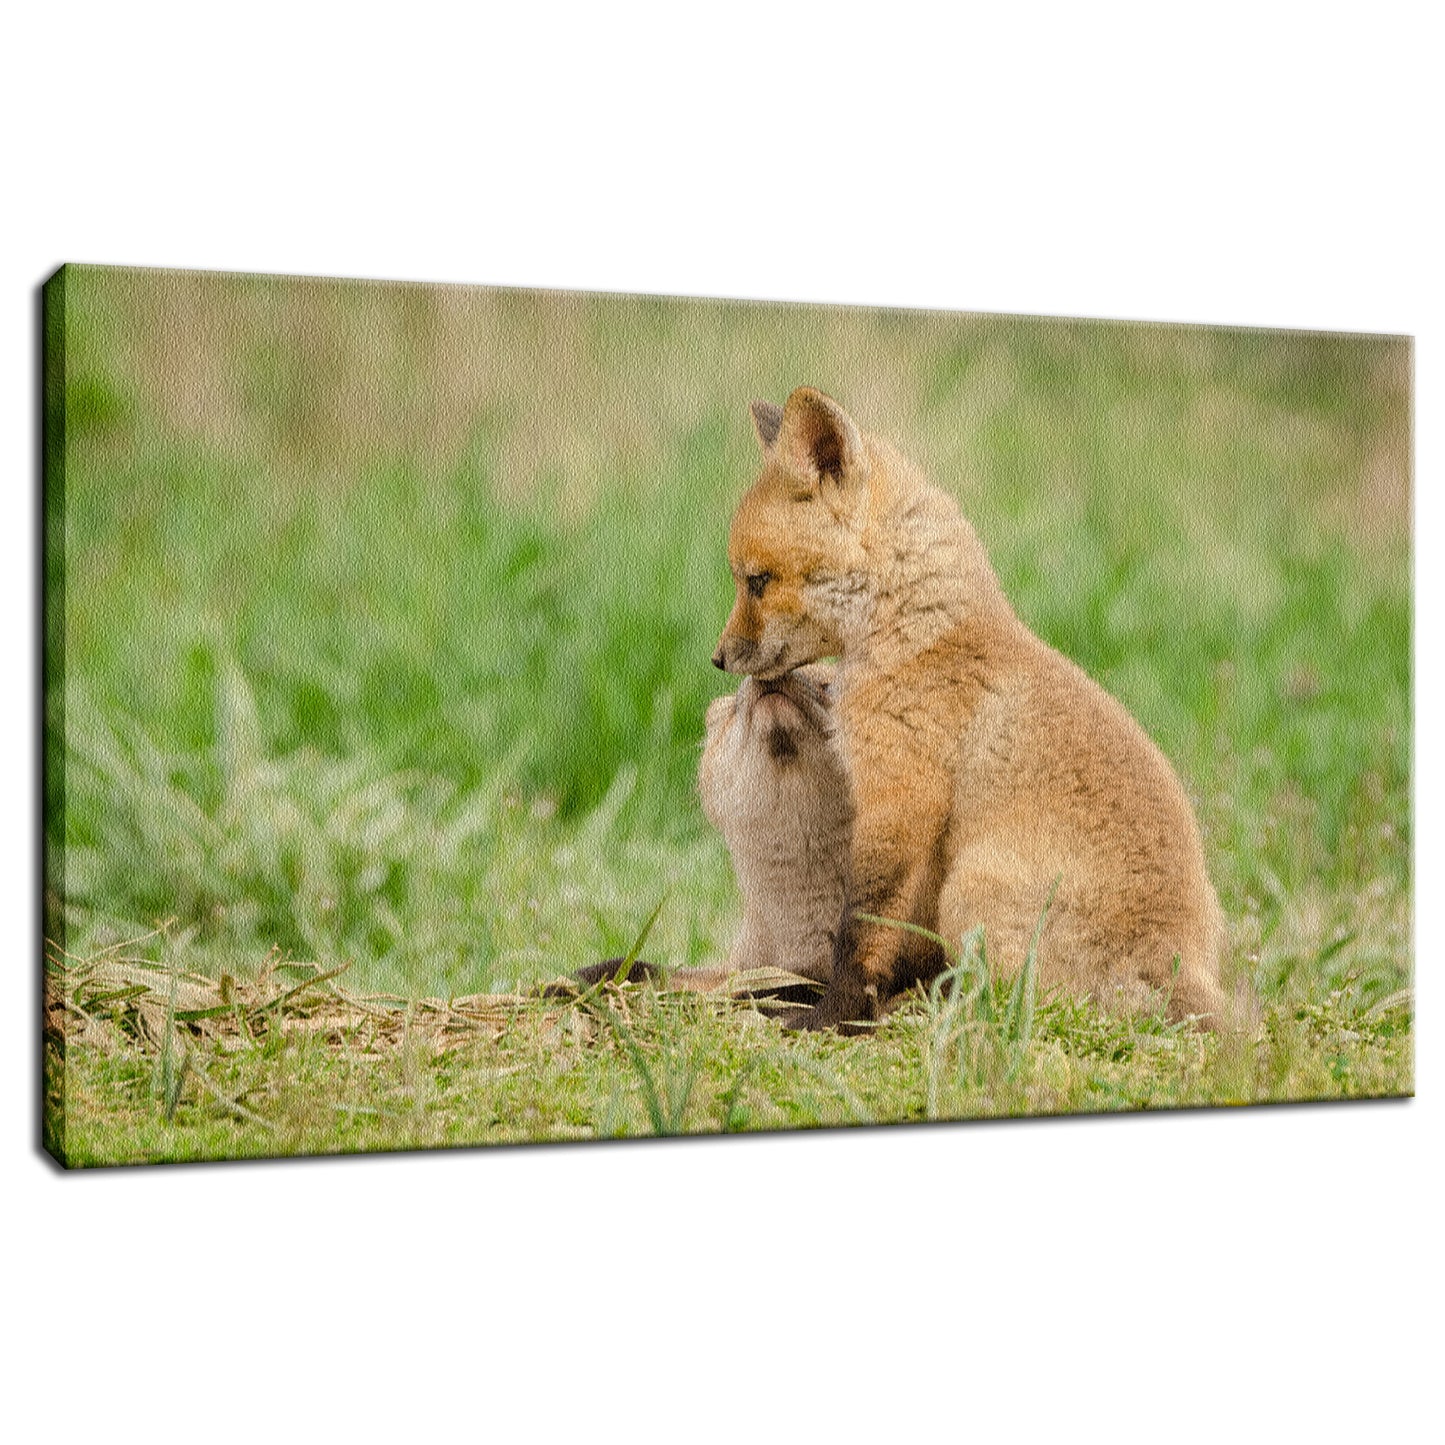 Sibling Kisses - Baby Red Fox Animal / Wildlife Photograph Fine Art Canvas & Unframed Wall Art Prints  - PIPAFINEART